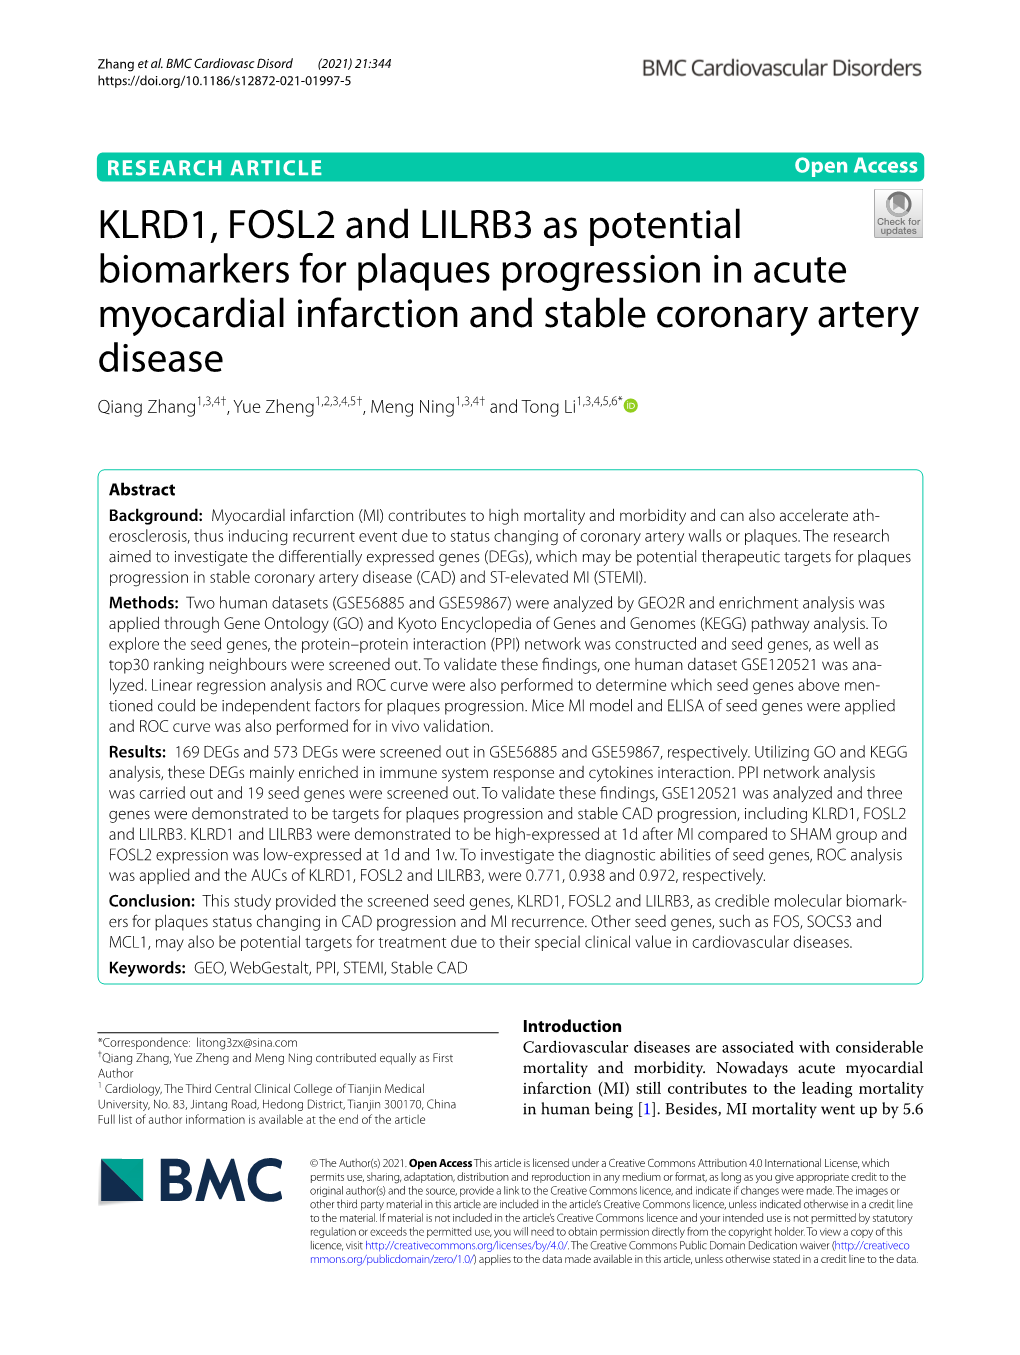 KLRD1, FOSL2 and LILRB3 As Potential Biomarkers for Plaques